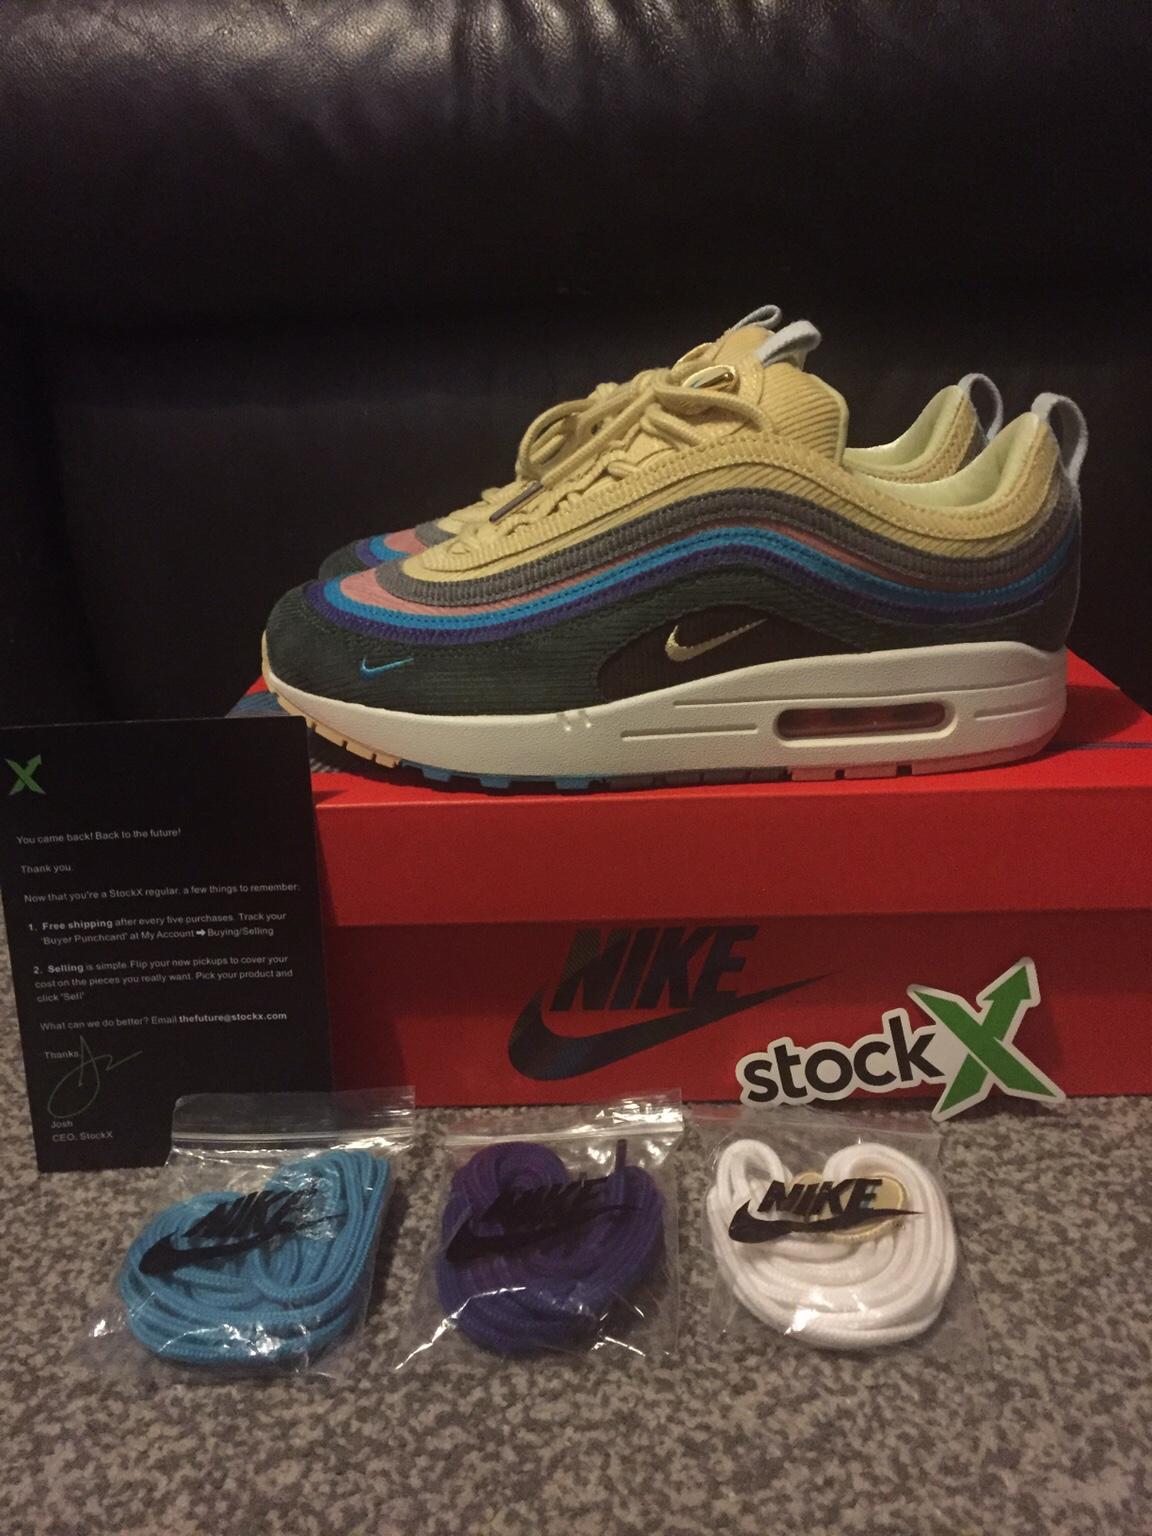 stockx sean wotherspoon